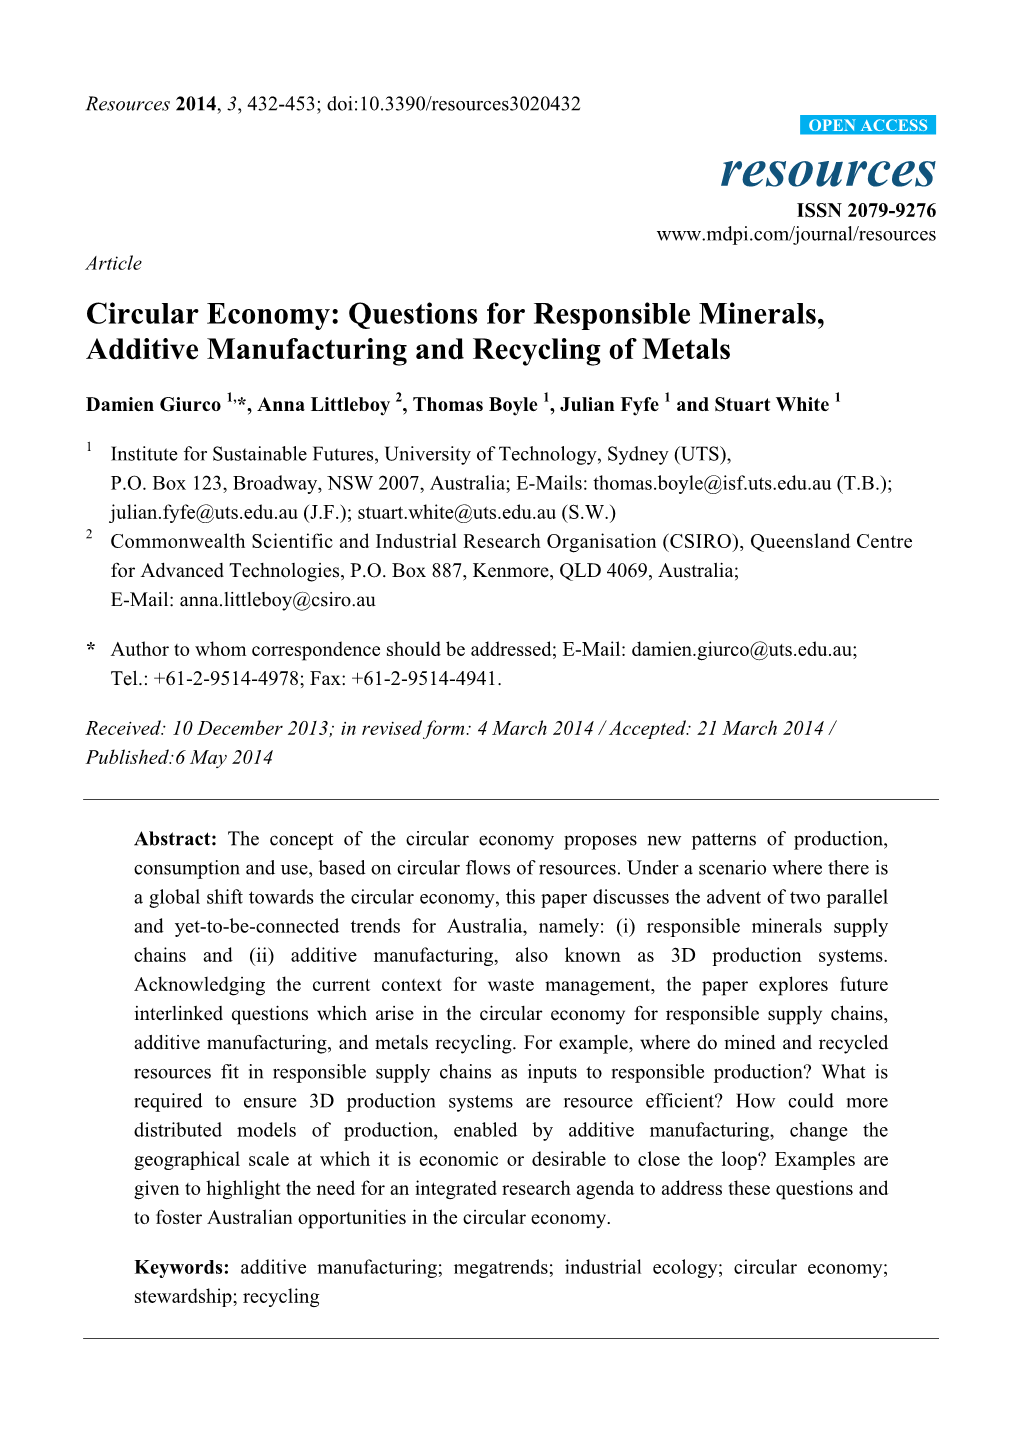 Circular Economy: Questions for Responsible Minerals, Additive Manufacturing and Recycling of Metals